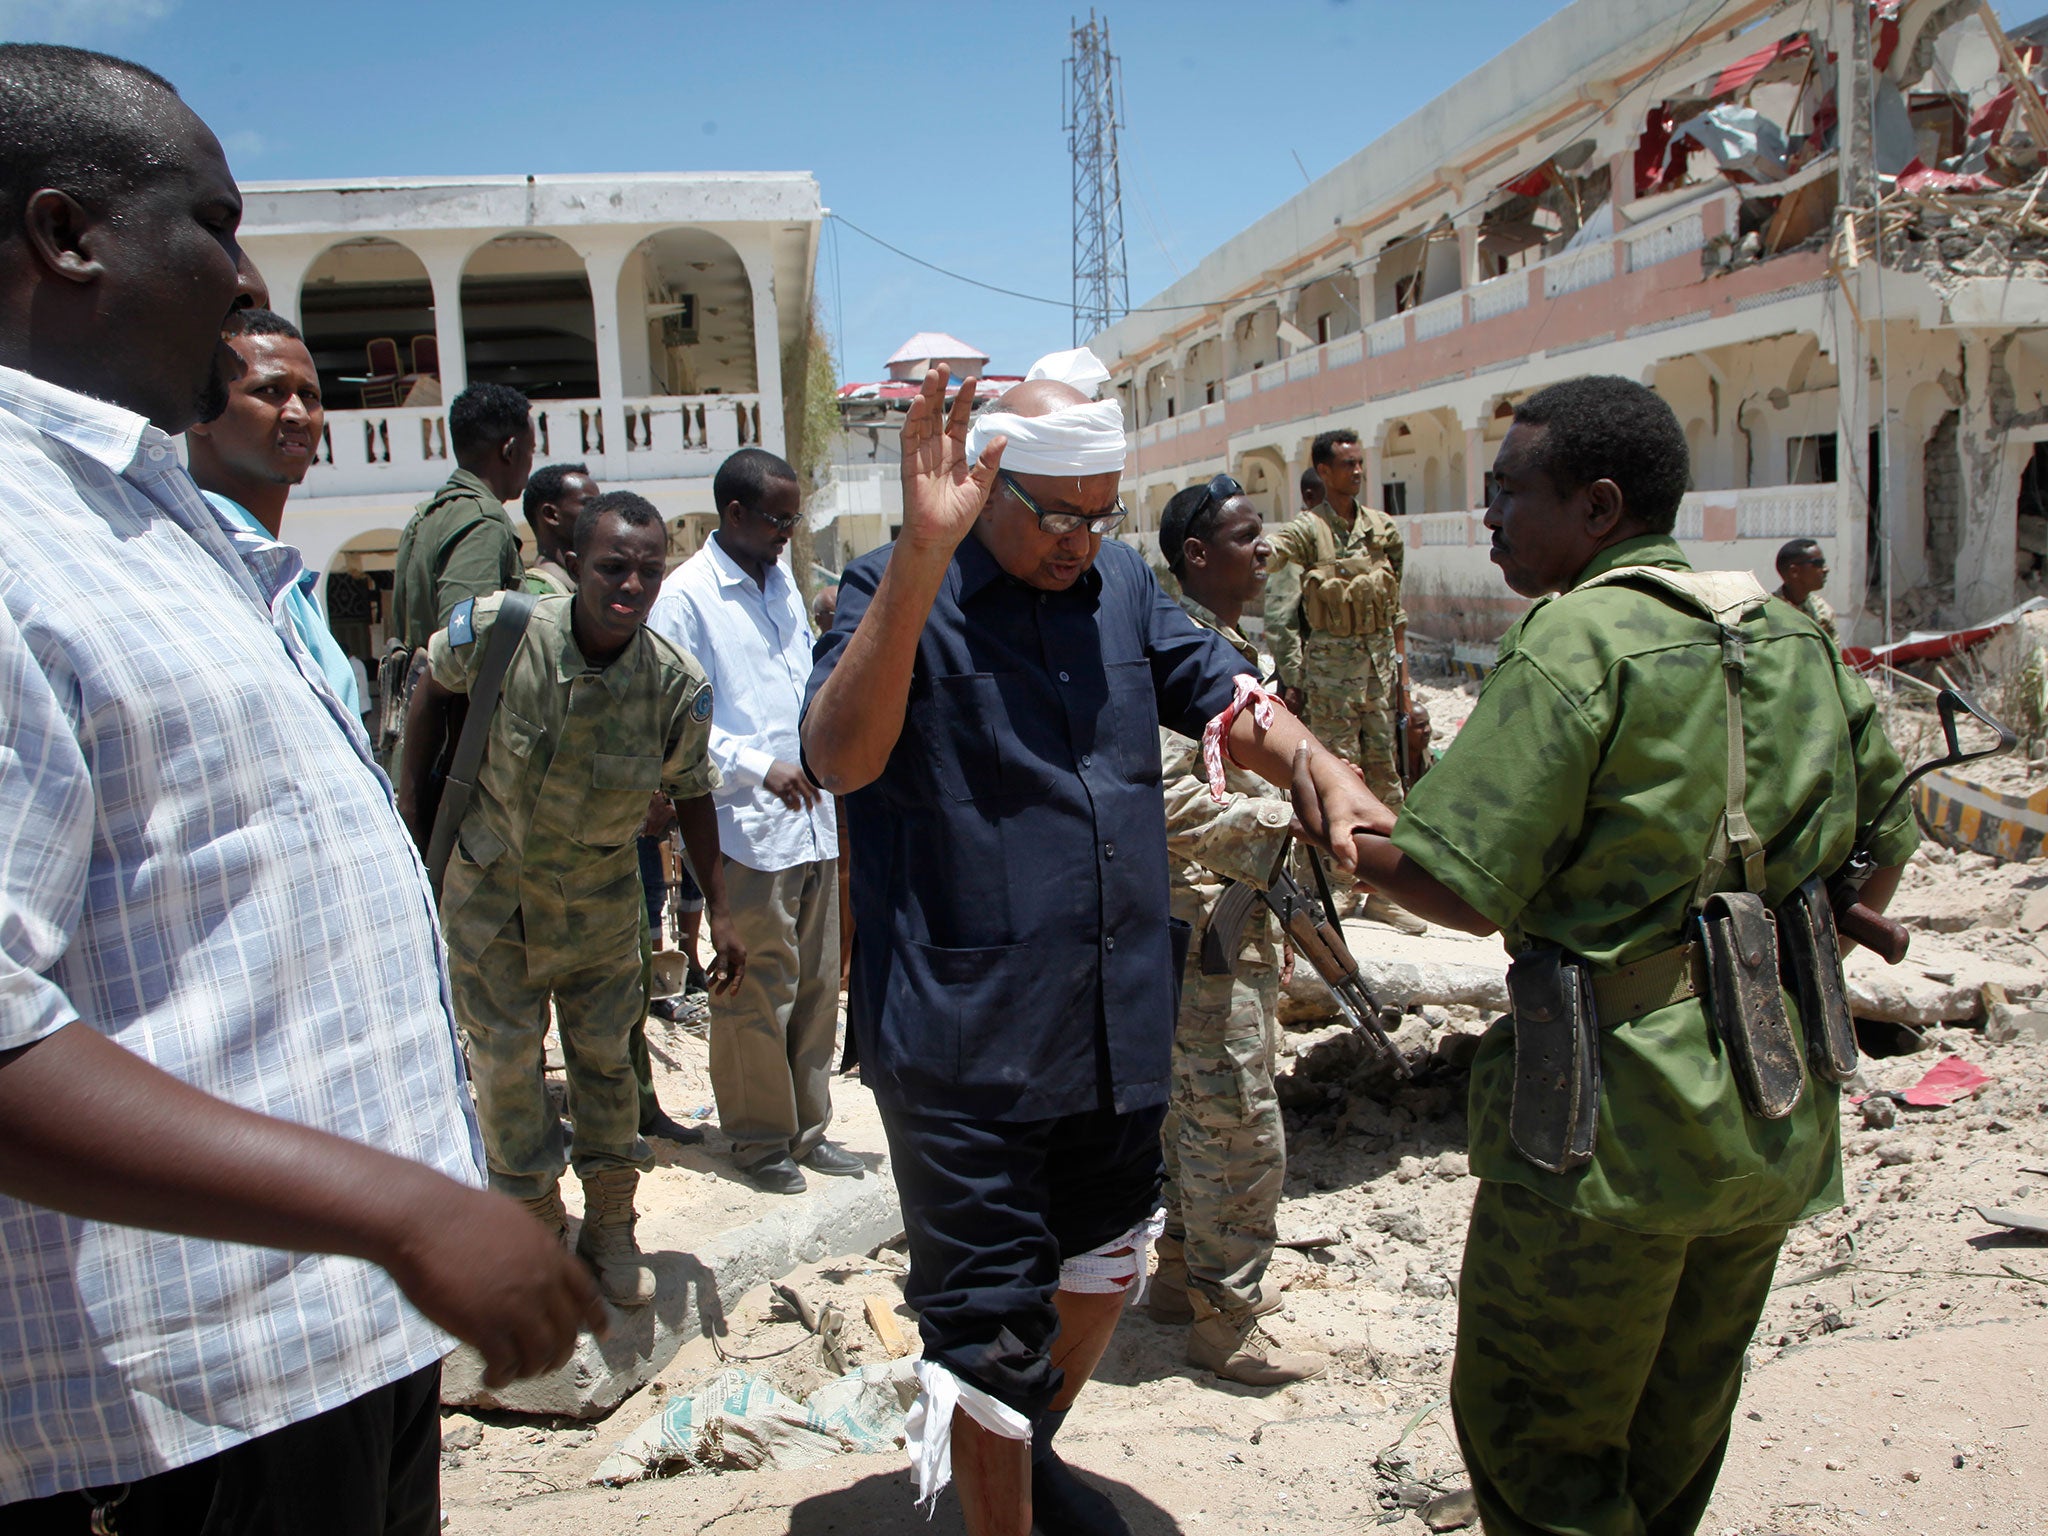 A soldier helps Somali politician Abdalla Bos Ahmed after he was injured by a blast near the presidential palace in Mogadishu yesterday